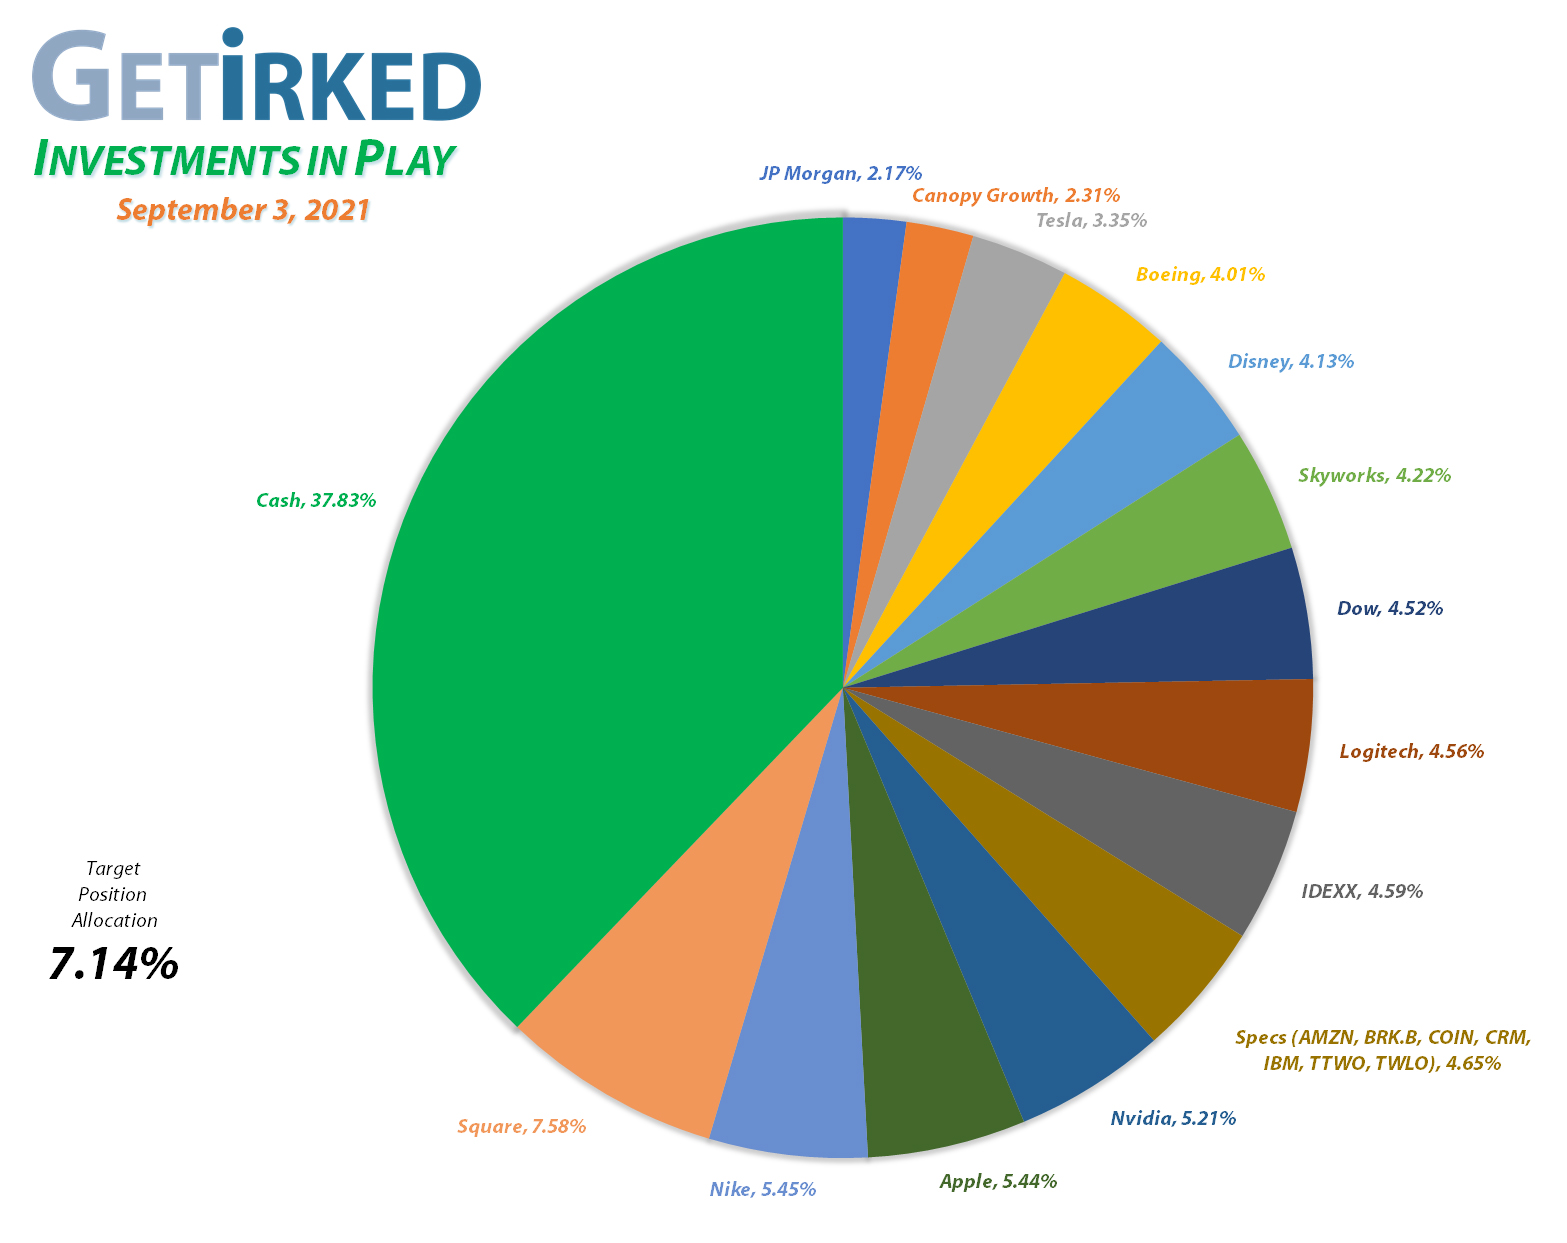 Get Irked - Investments in Play - Current Holdings - March 12, 2021et Irked's Pandemic Portfolio Holdings as of September 3, 2021